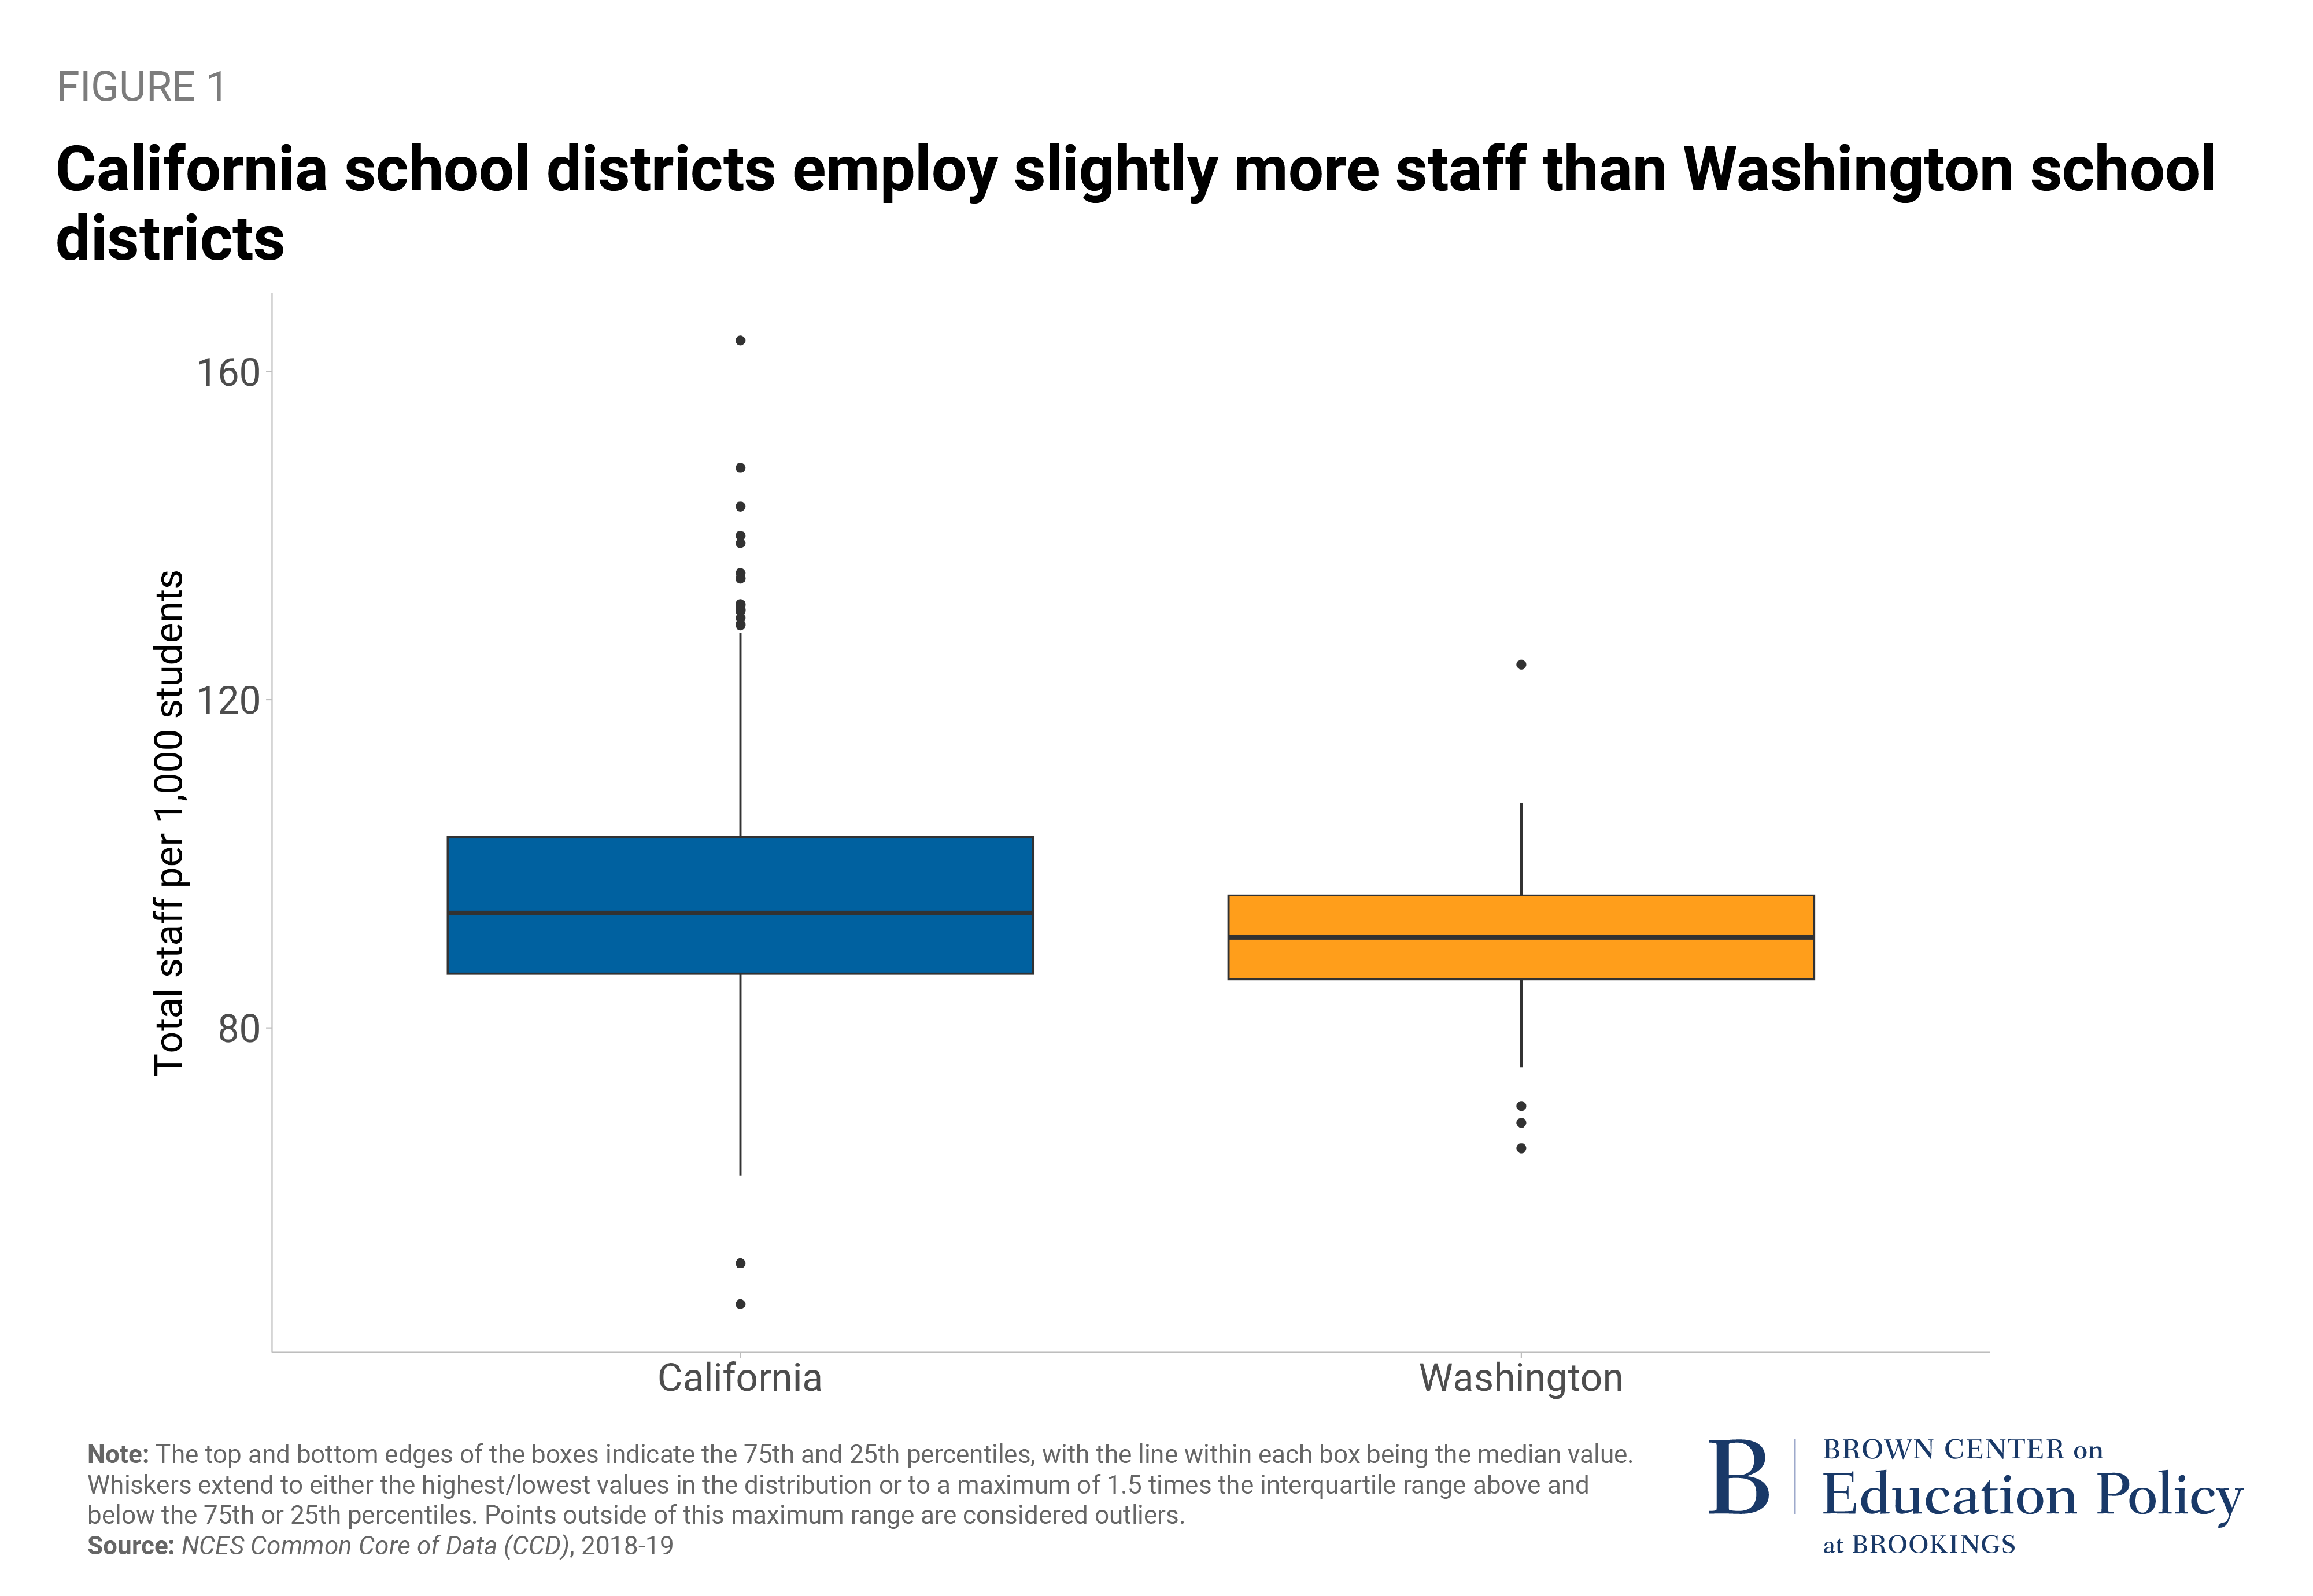 Figure showing California school districts employ slightly more staff than Washington school districts.